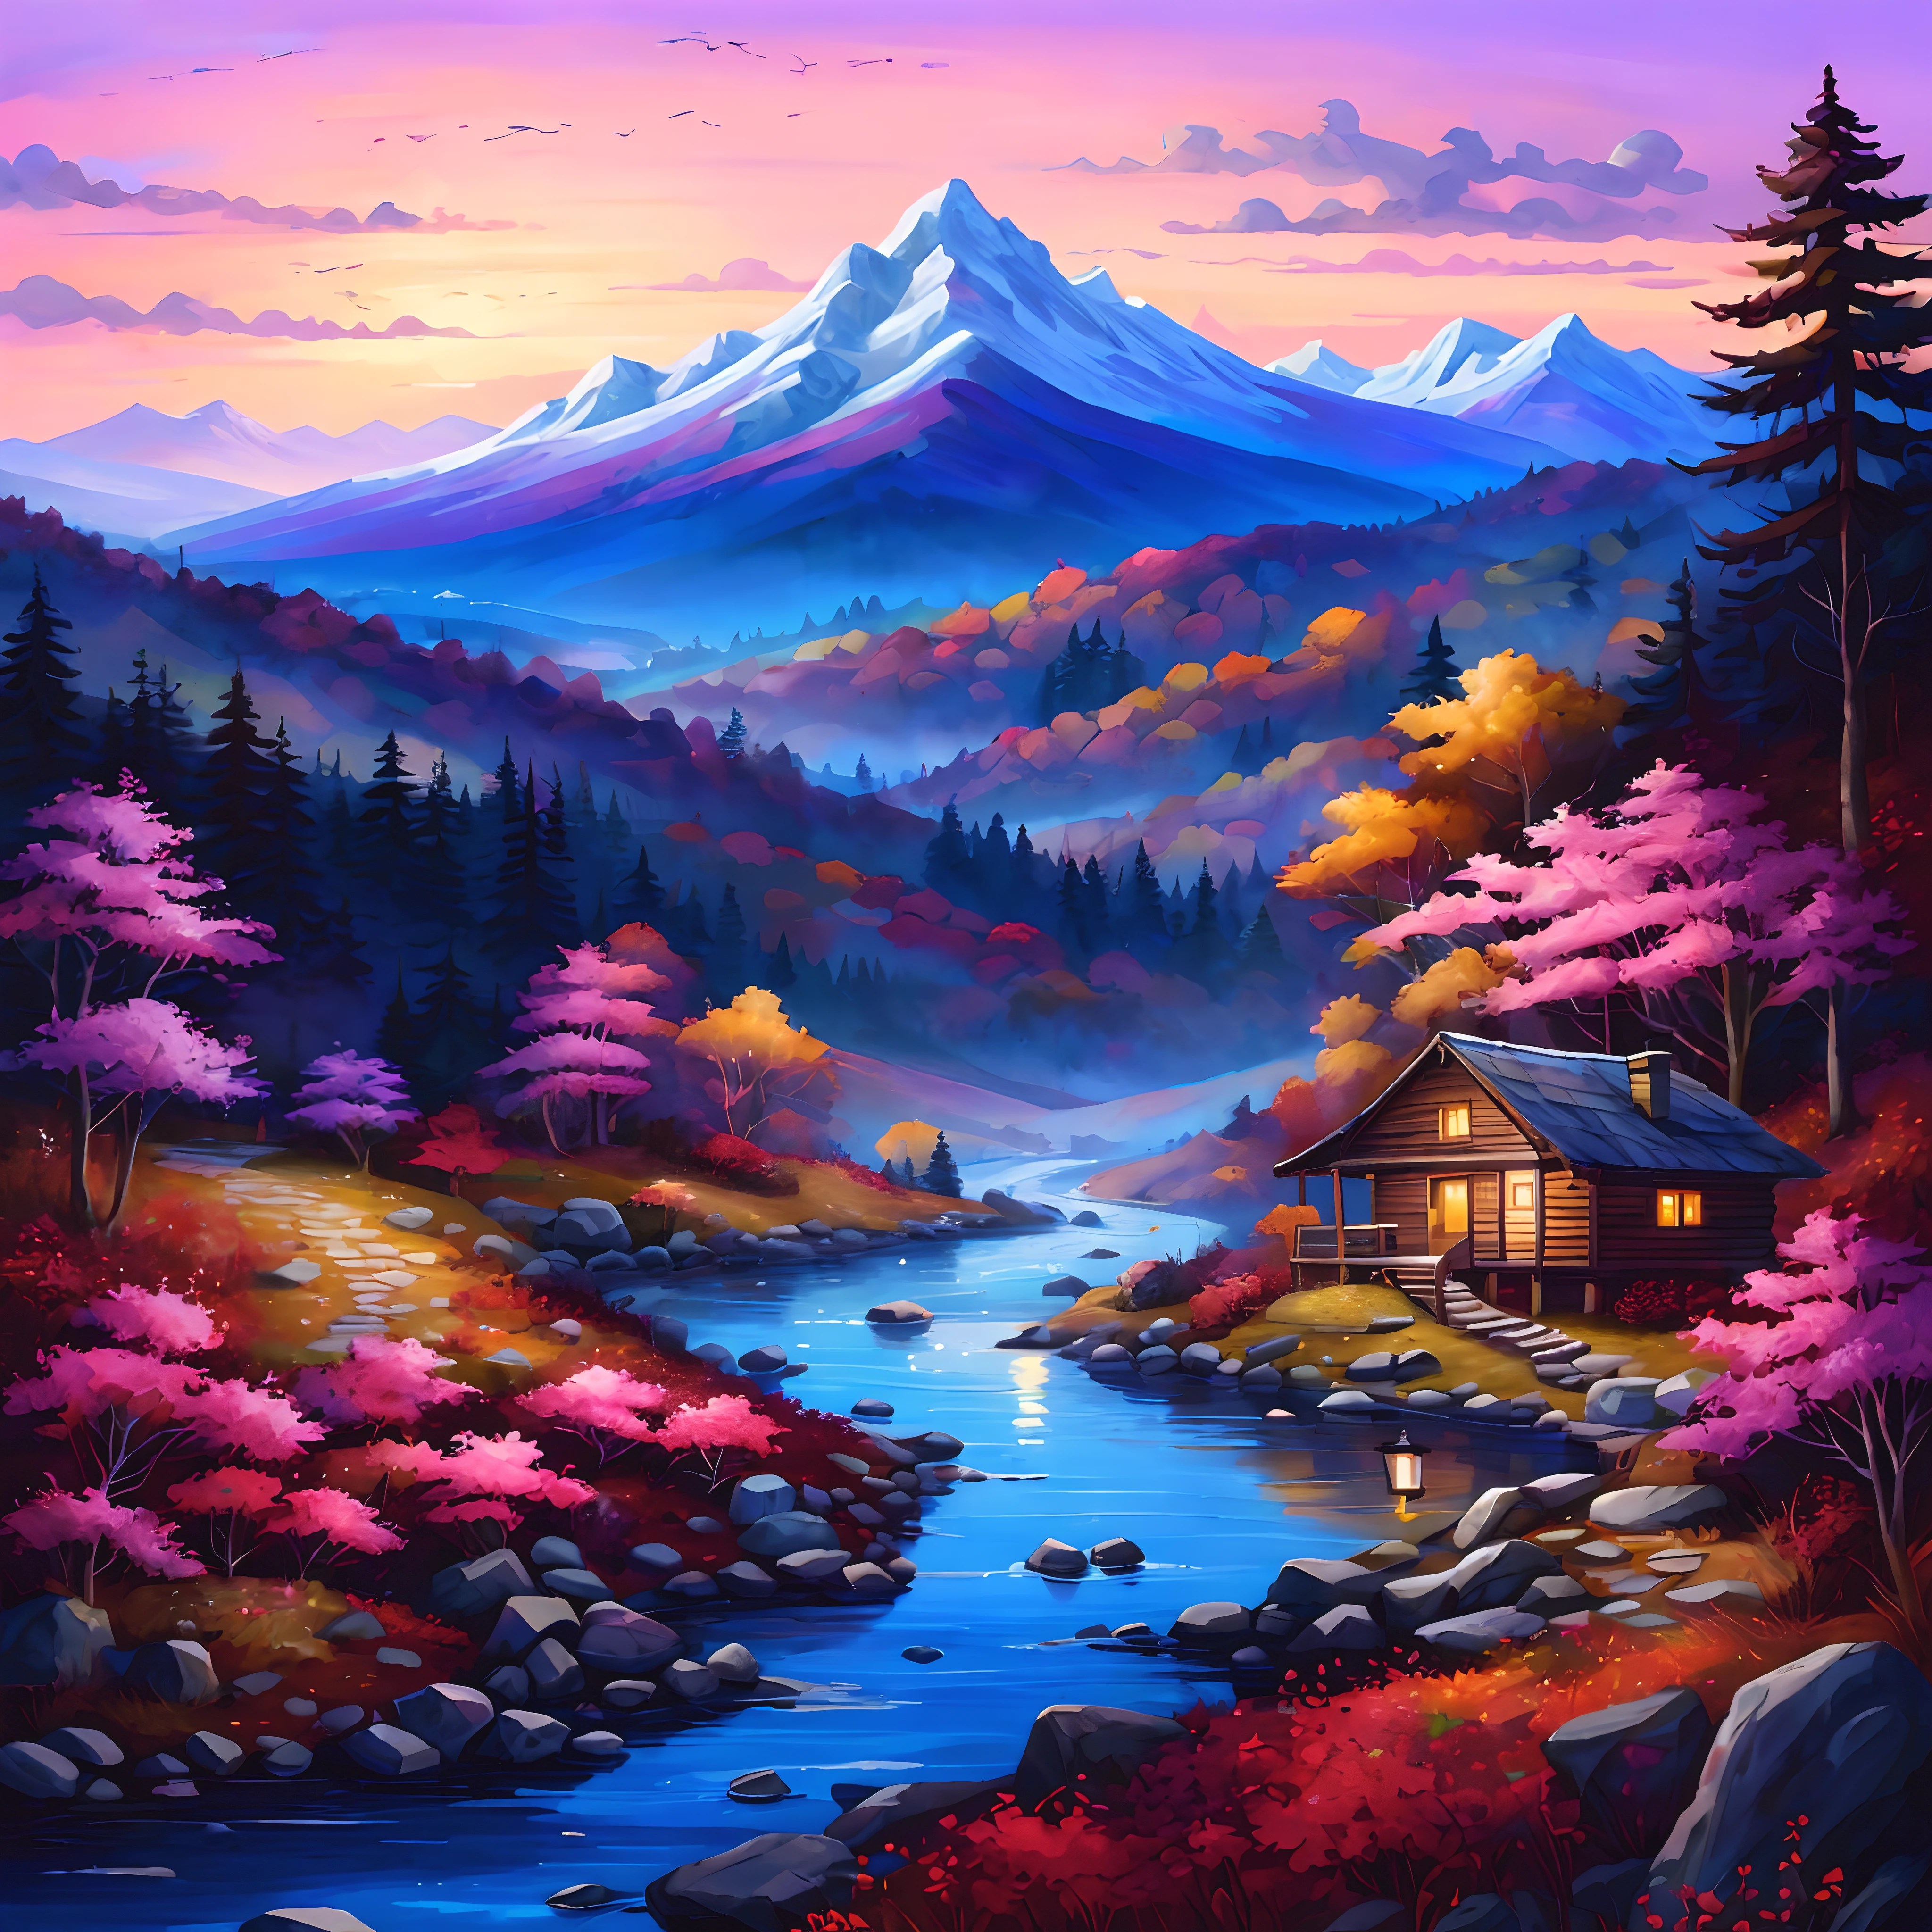 painting of a mountain scene with a cabin and a stream, detailed painting 4 k, beautiful art uhd 4 k, scenery art detailed, rich picturesque colors, vibrant gouache painting scenery, colorful landscape painting, extraordinary colorful landscape, autumn mountains, scenery artwork, dream scenery art, magical landscape, full of colors and rich detail, scenic colorful environment, peaceful landscape